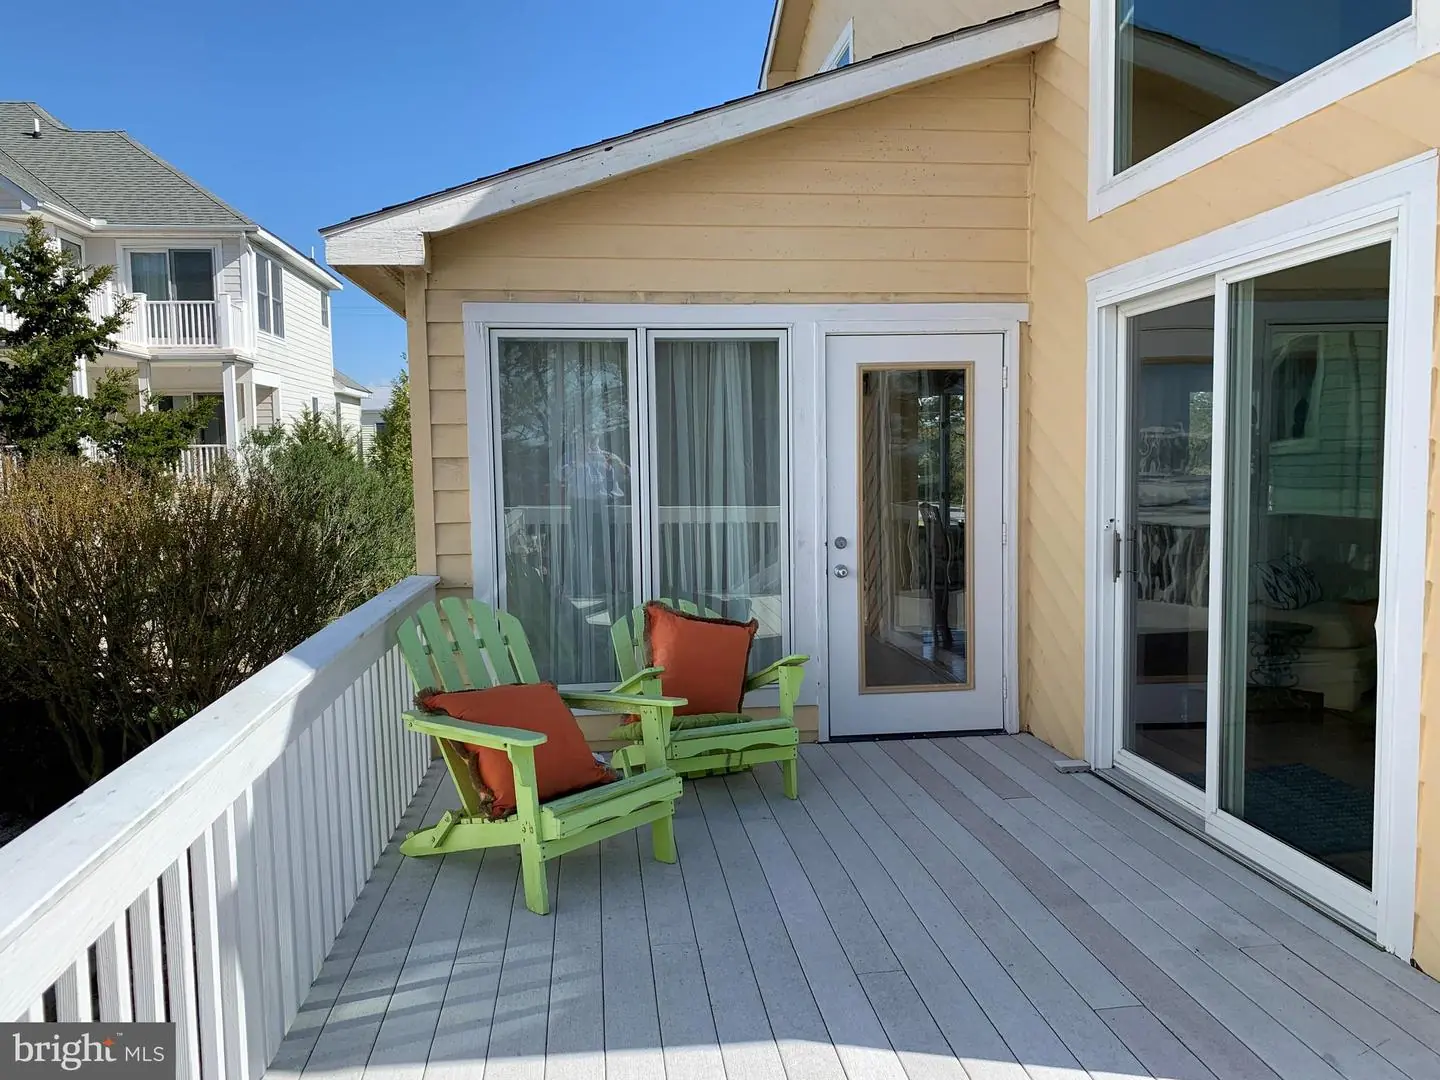 DESU164670-304207560337-2021-07-17-02-03-16 35199 Hassell Ave | Bethany Beach, DE Real Estate For Sale | MLS# Desu164670  - 1st Choice Properties